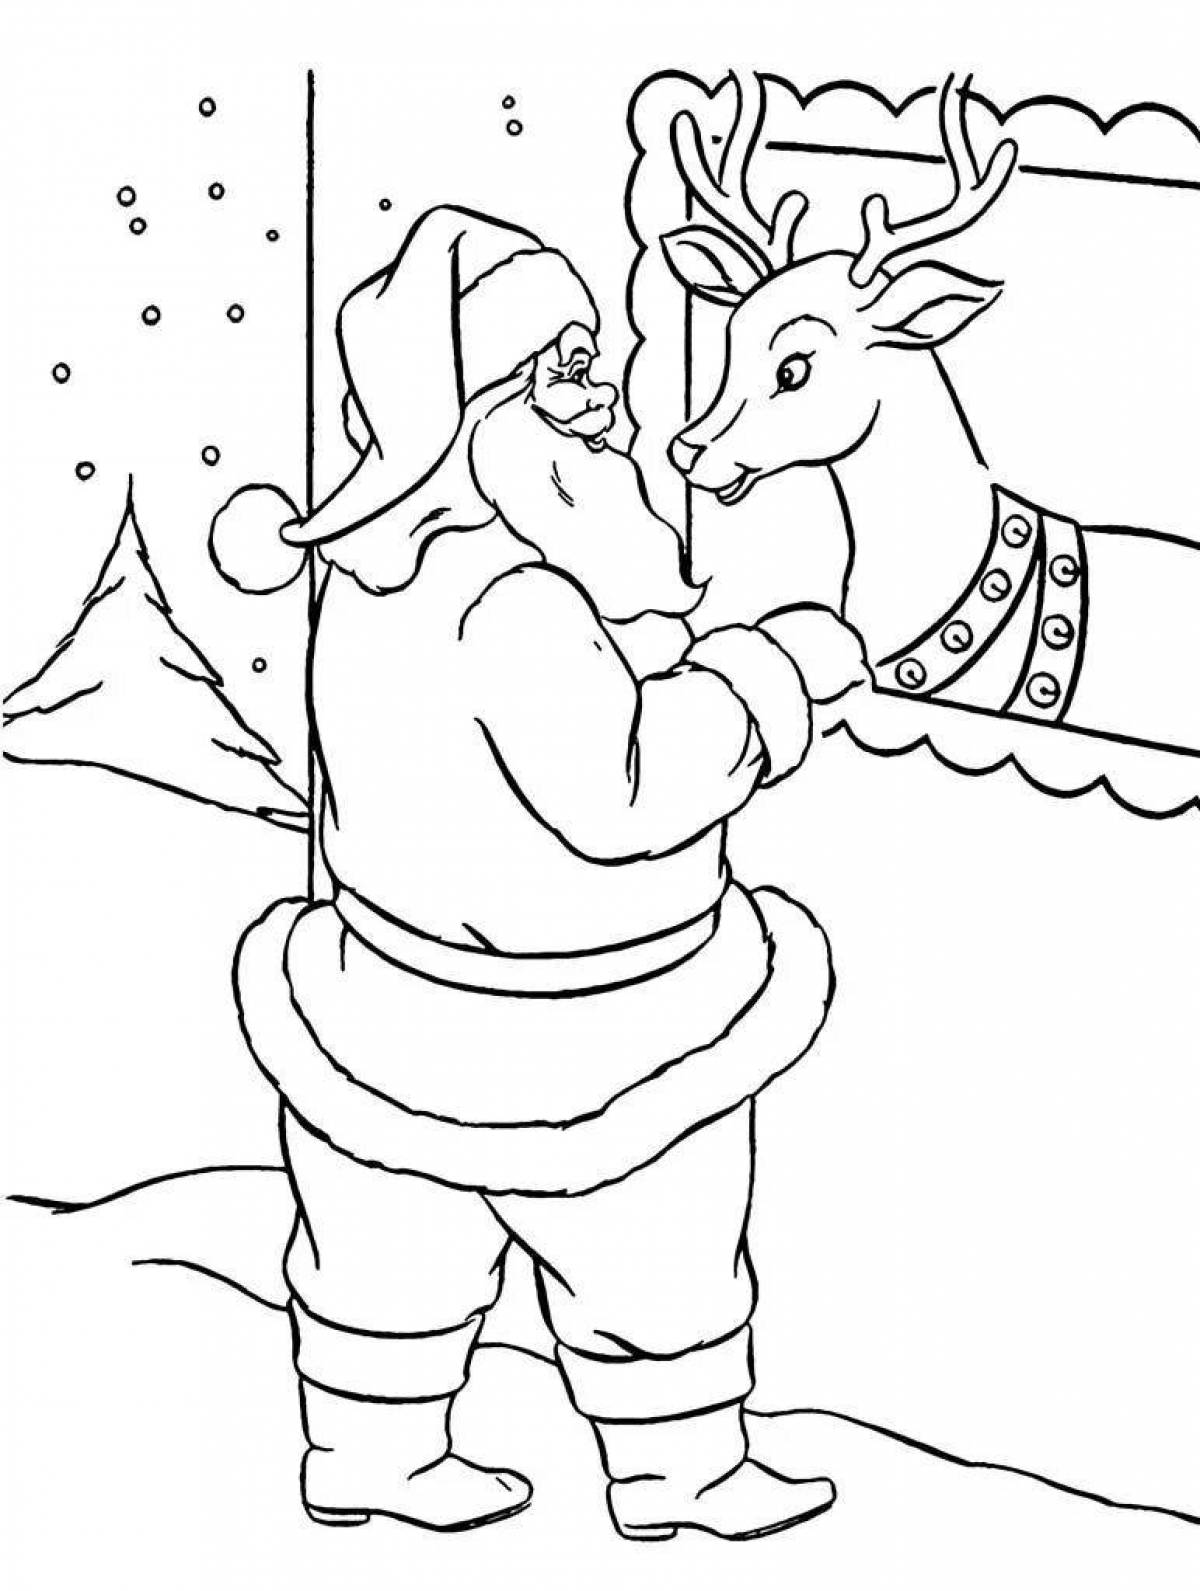 Colorful santa claus and reindeer coloring page